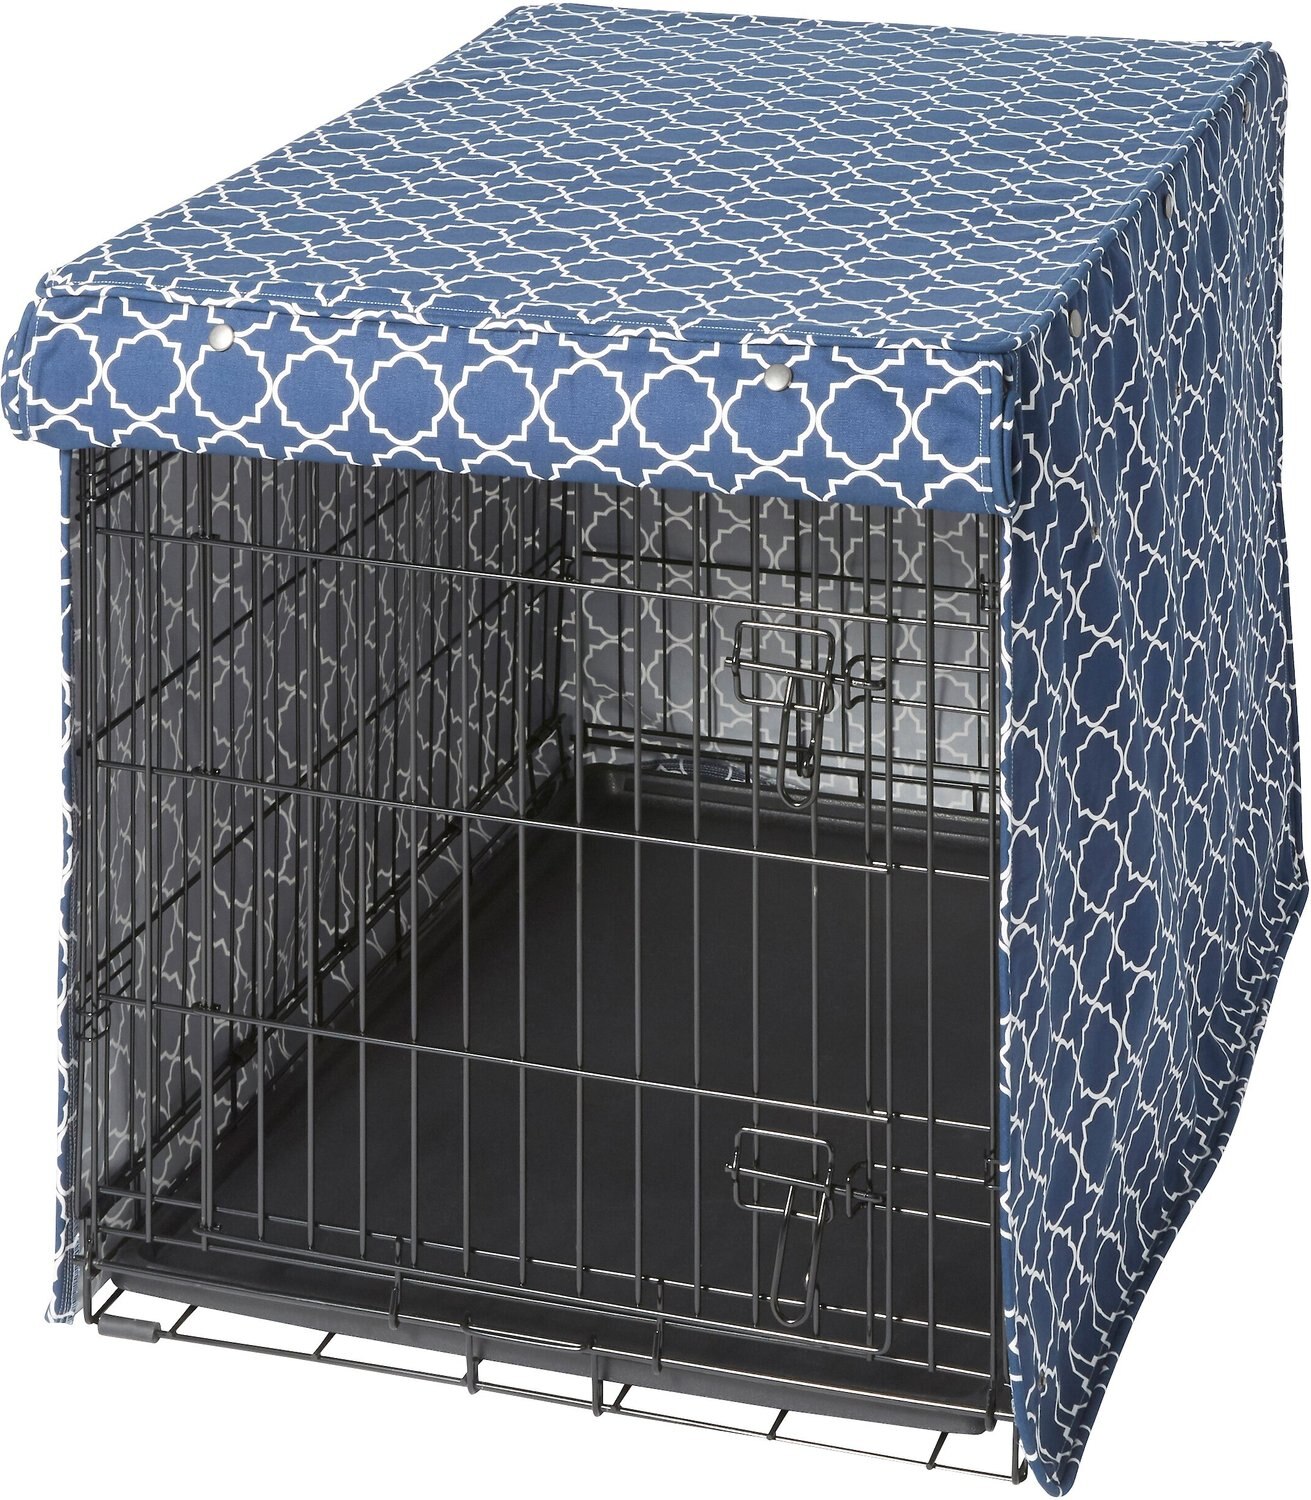 FRISCO Crate Cover, Navy Trellis, 36 inch